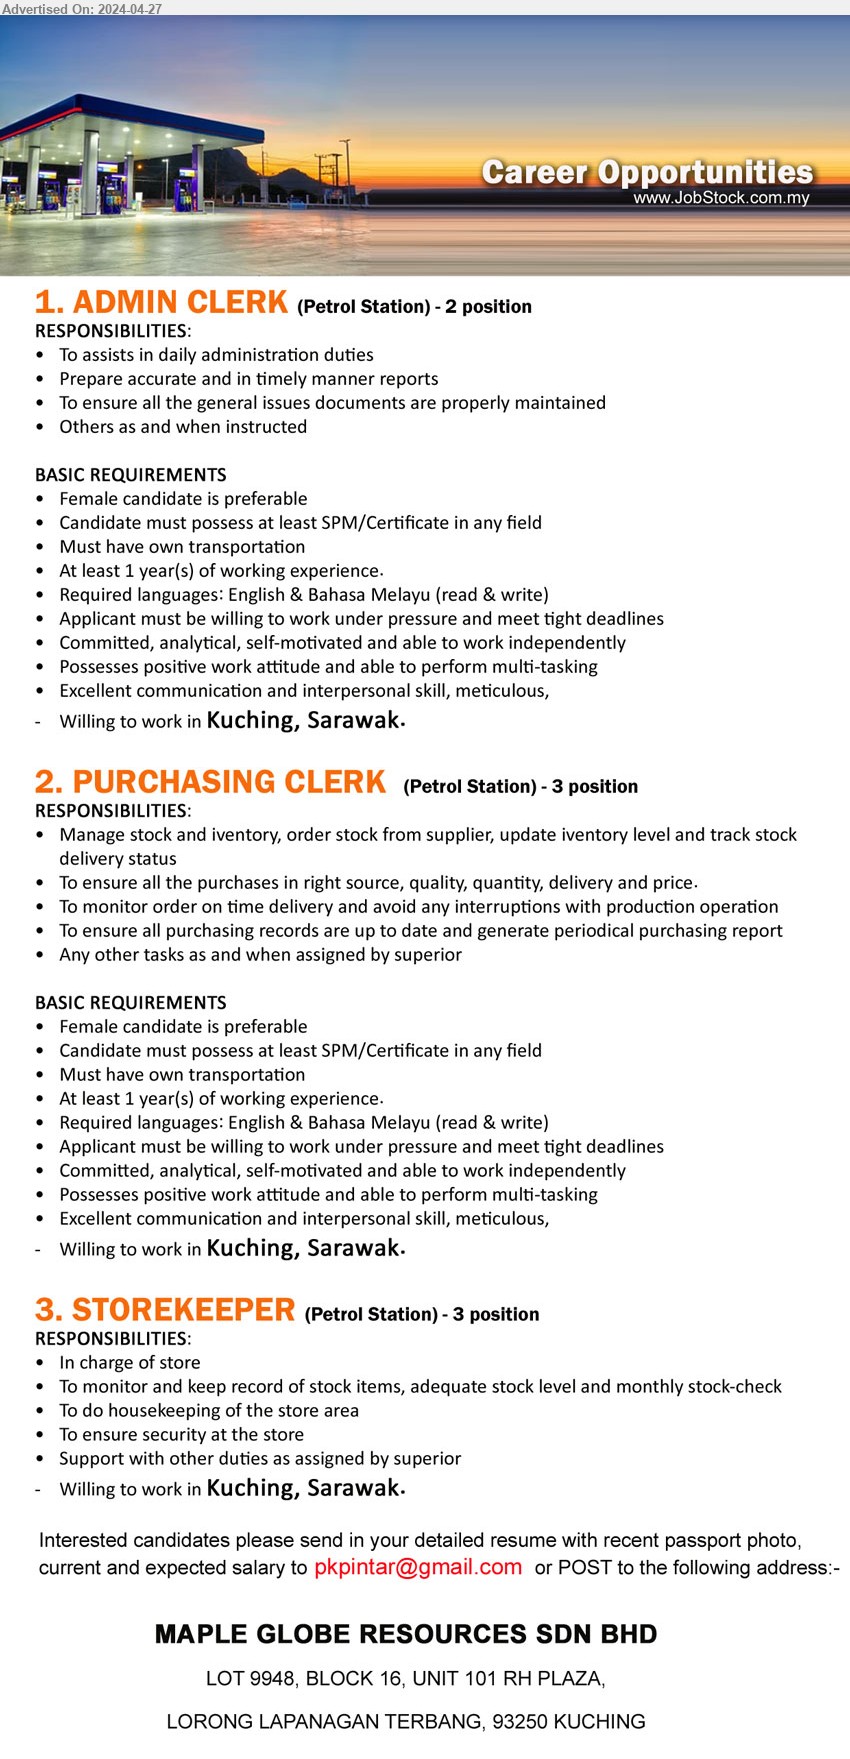 MAPLE GLOBE RESOURCES SDN BHD - 1. ADMIN CLERK (Kuching - Petrol Station), 2 posts, Female, SPM/ Certificate, Must have own transportation,...
2. PURCHASING CLERK  (Kuching - Petrol Station), 3 posts, Female, SPM/ Certificate, Must have own transportation,...
3. STOREKEEPER (Kuching - Petrol Station), 3 posts, To monitor and keep record of stock items, adequate stock level and monthly stock-check,...
Email resume to ...